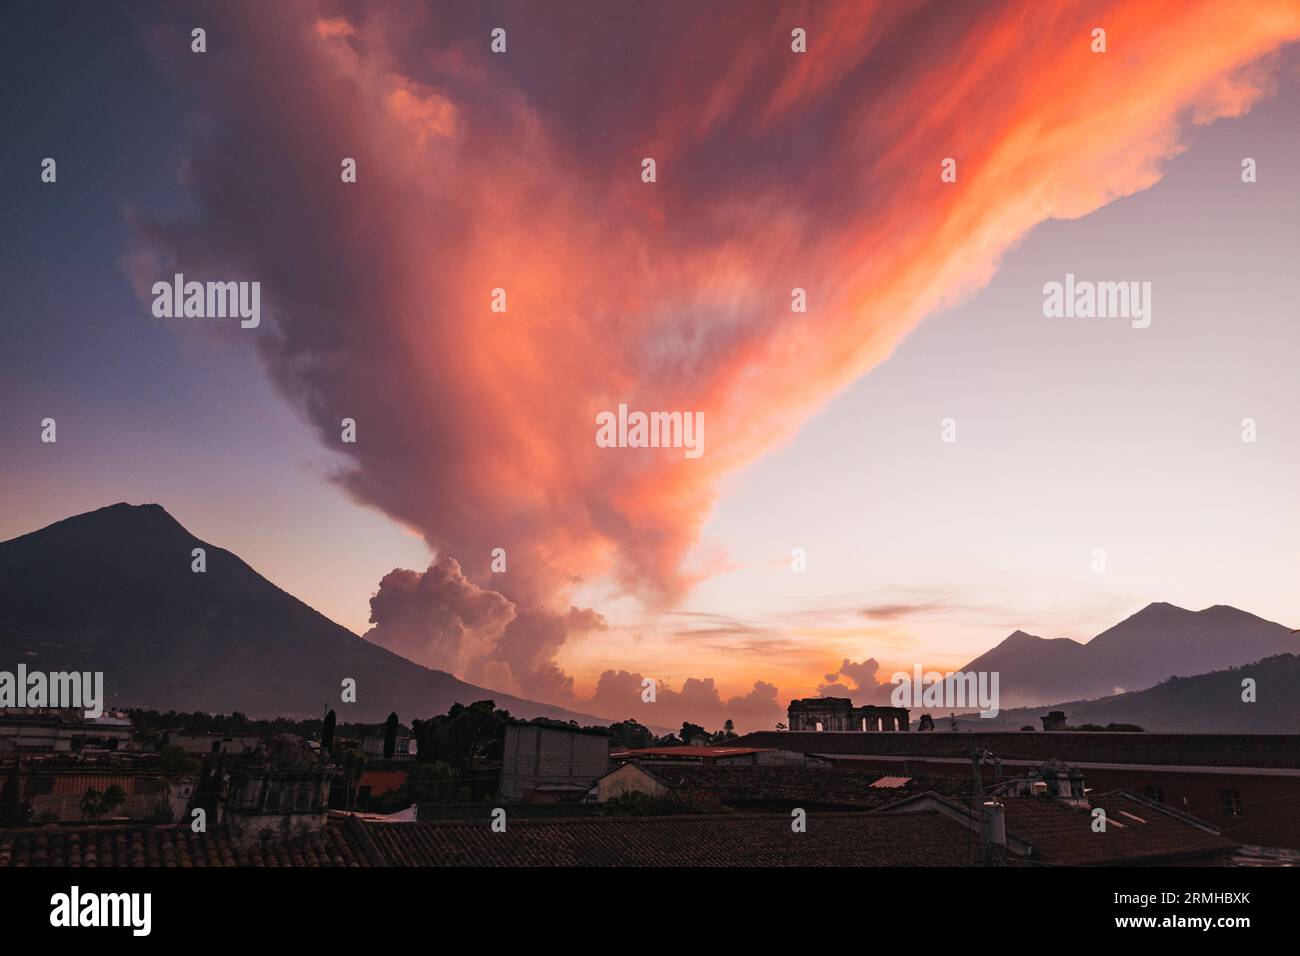 A dramatic pink cloud sweeps over the mountains and Spanish colonial rooftops of Antigua, Guatemala, at sunset Stock Photo